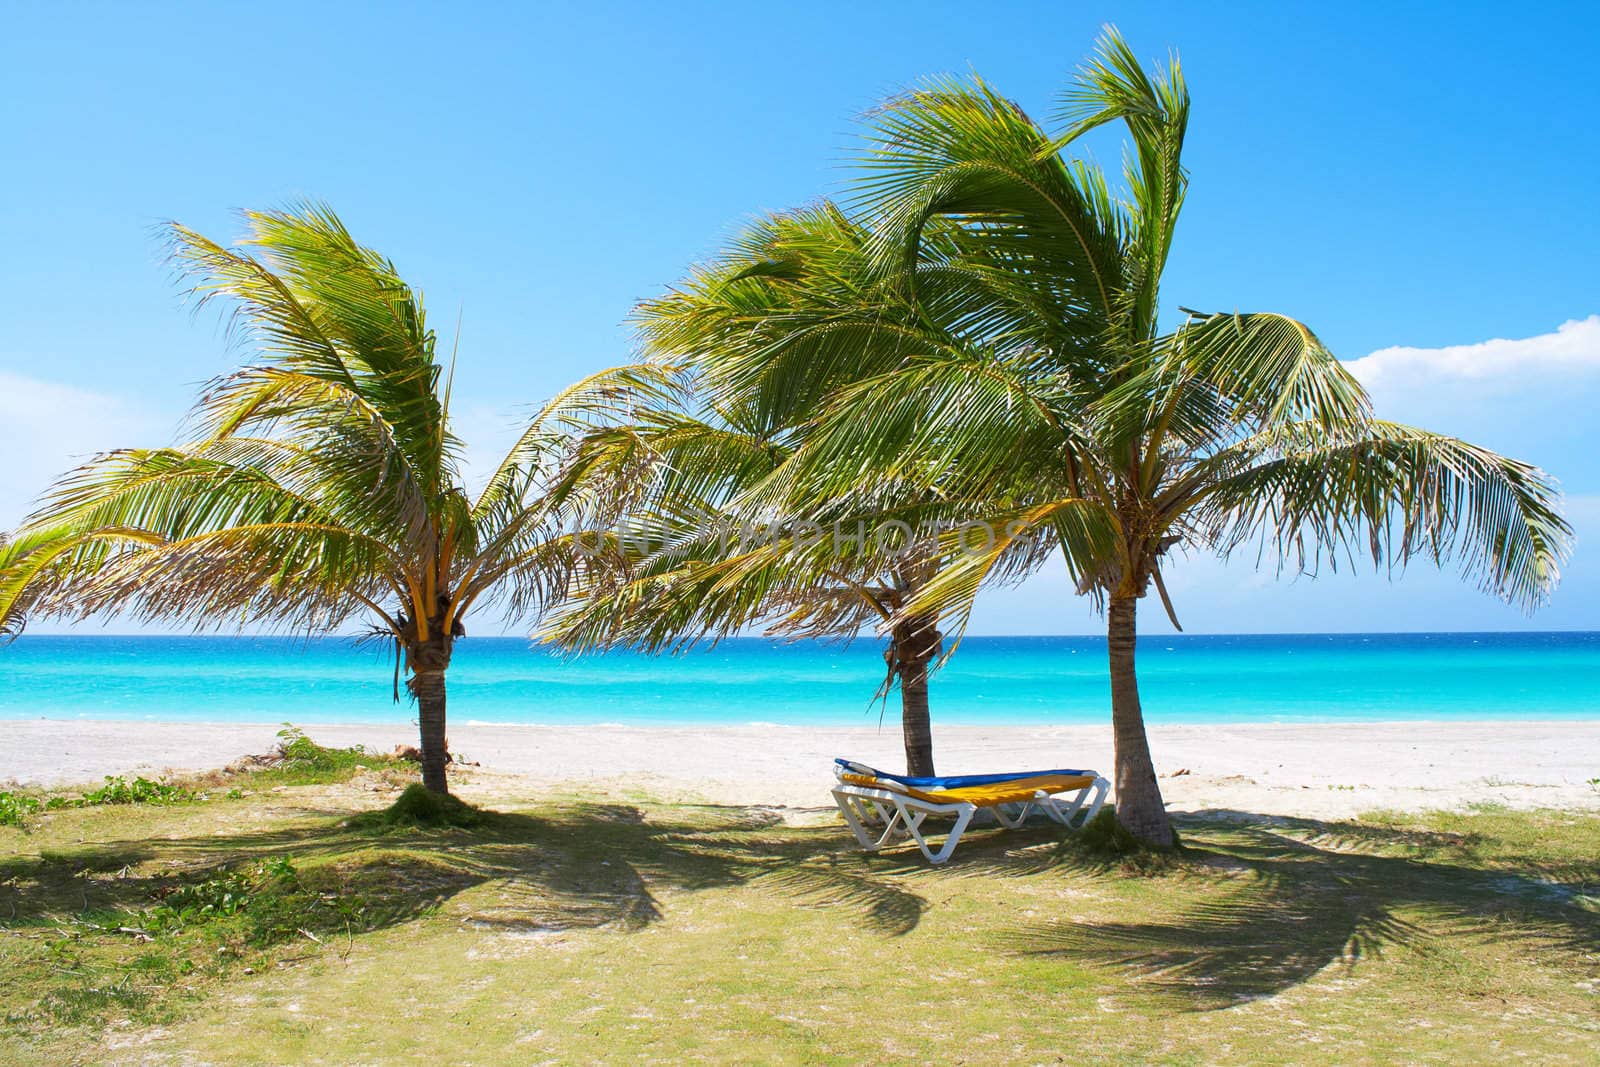 Palm trees in a sandy beach with clear blue water